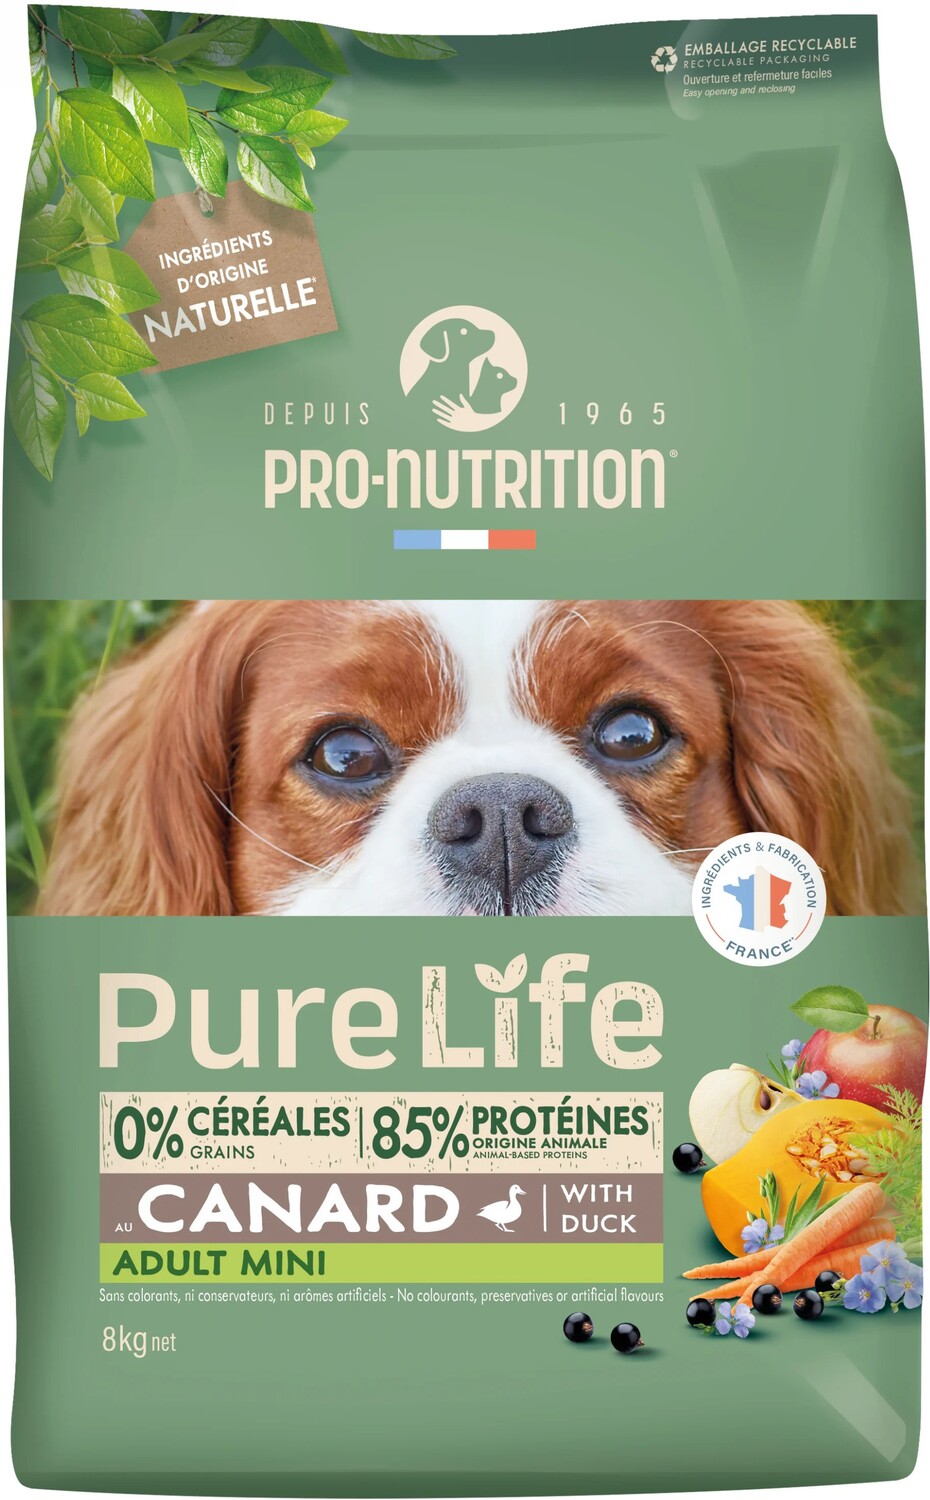 Pro-Nutrition Pure Life Adult Mini au Canard with Duck - zoom